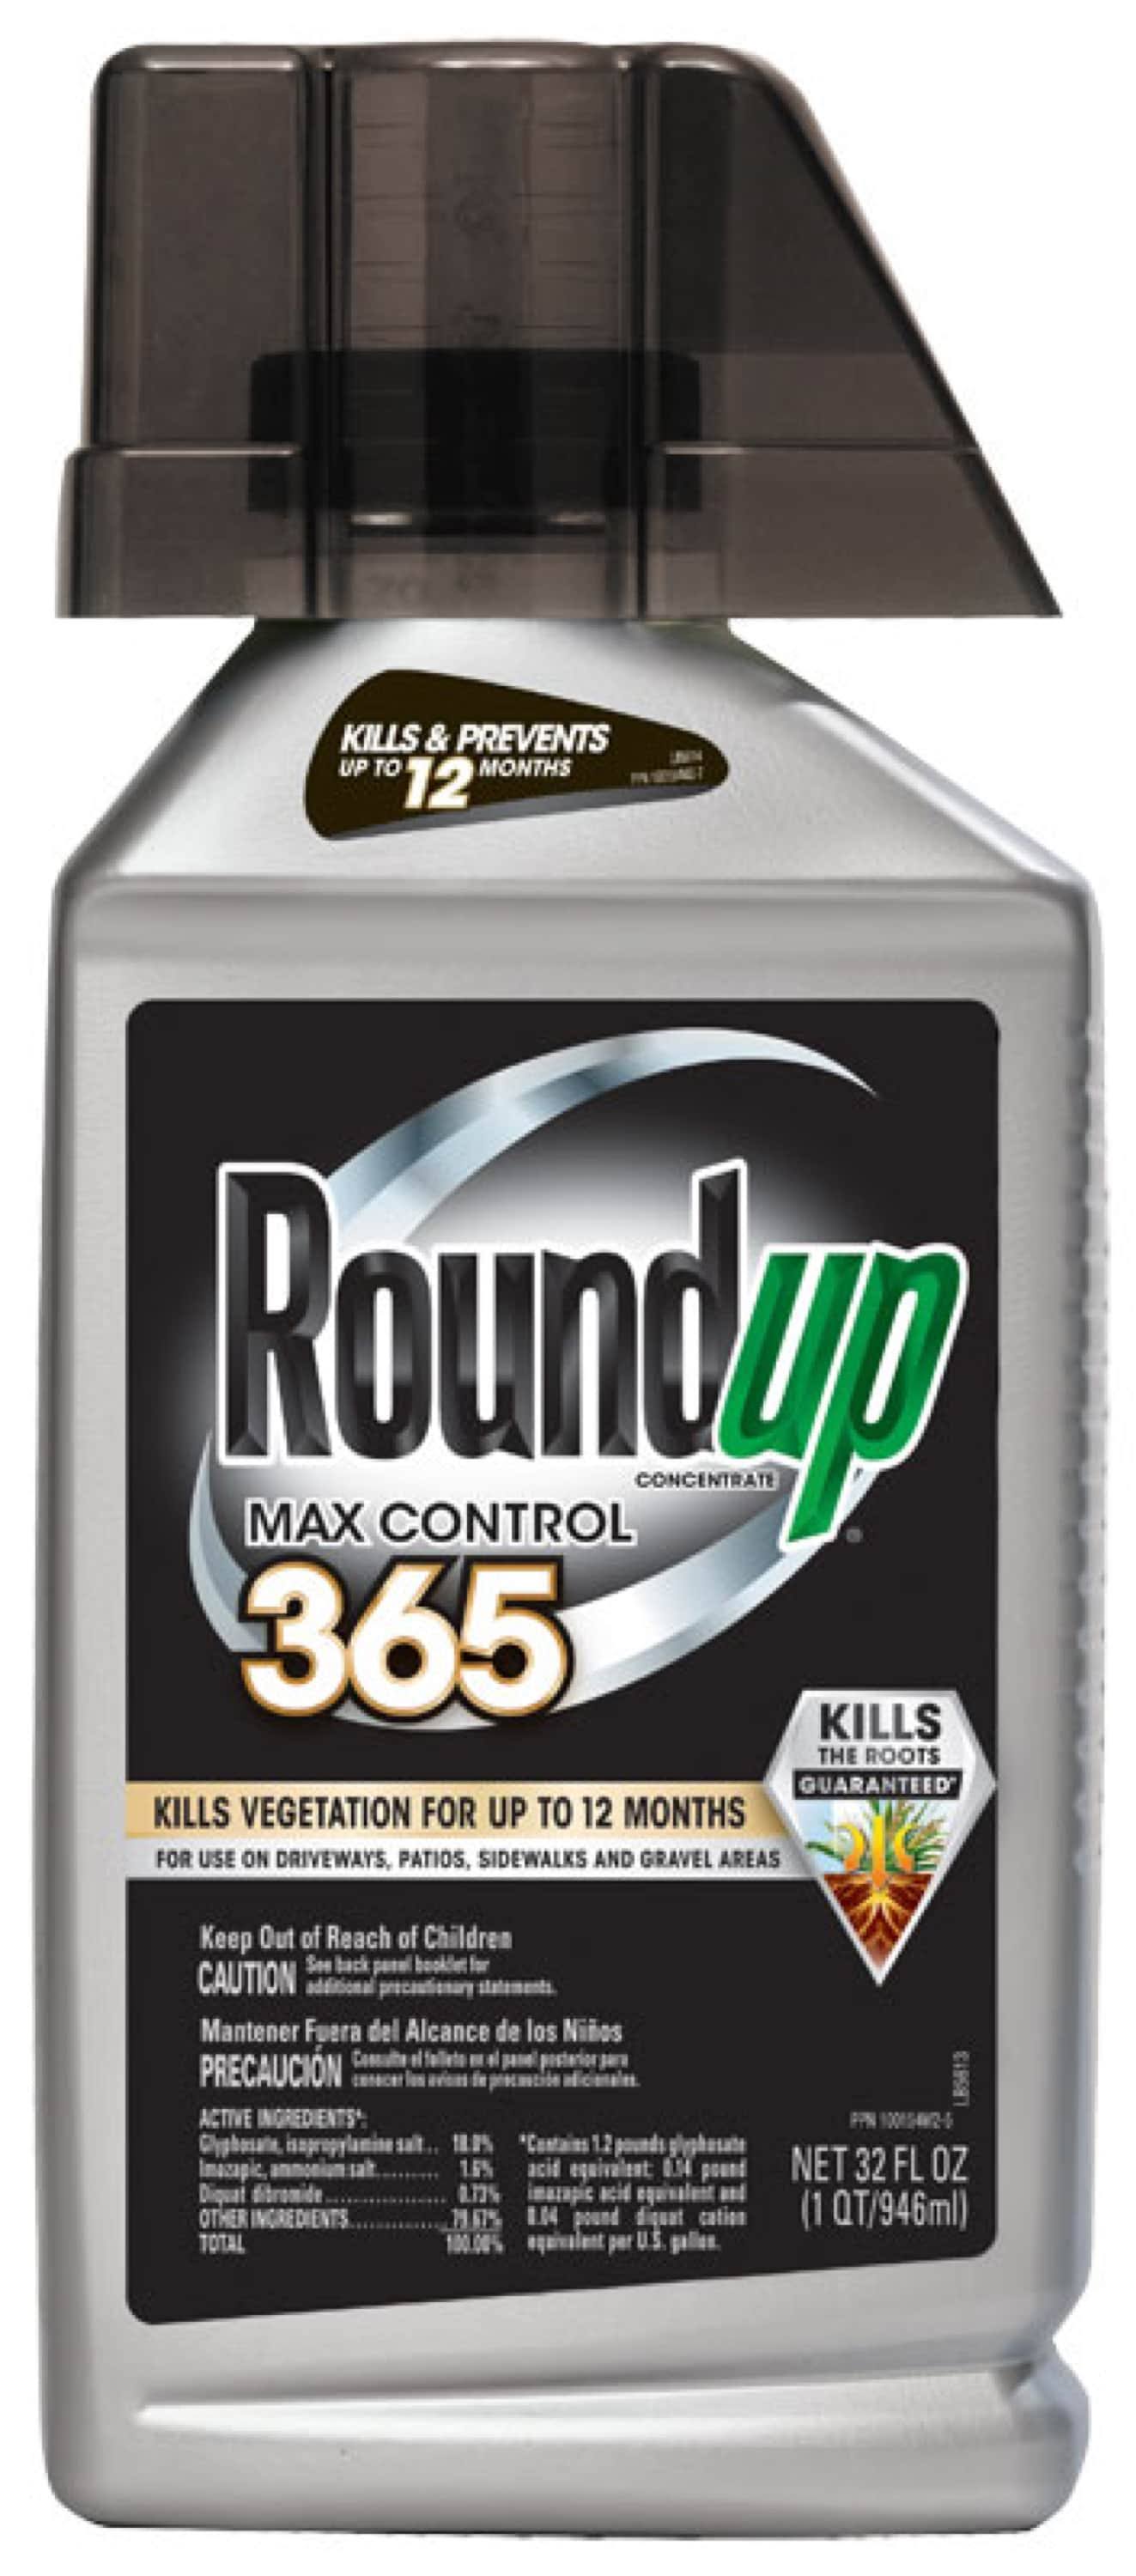 Roundup Max Control 365 Concentrate Weed Killer